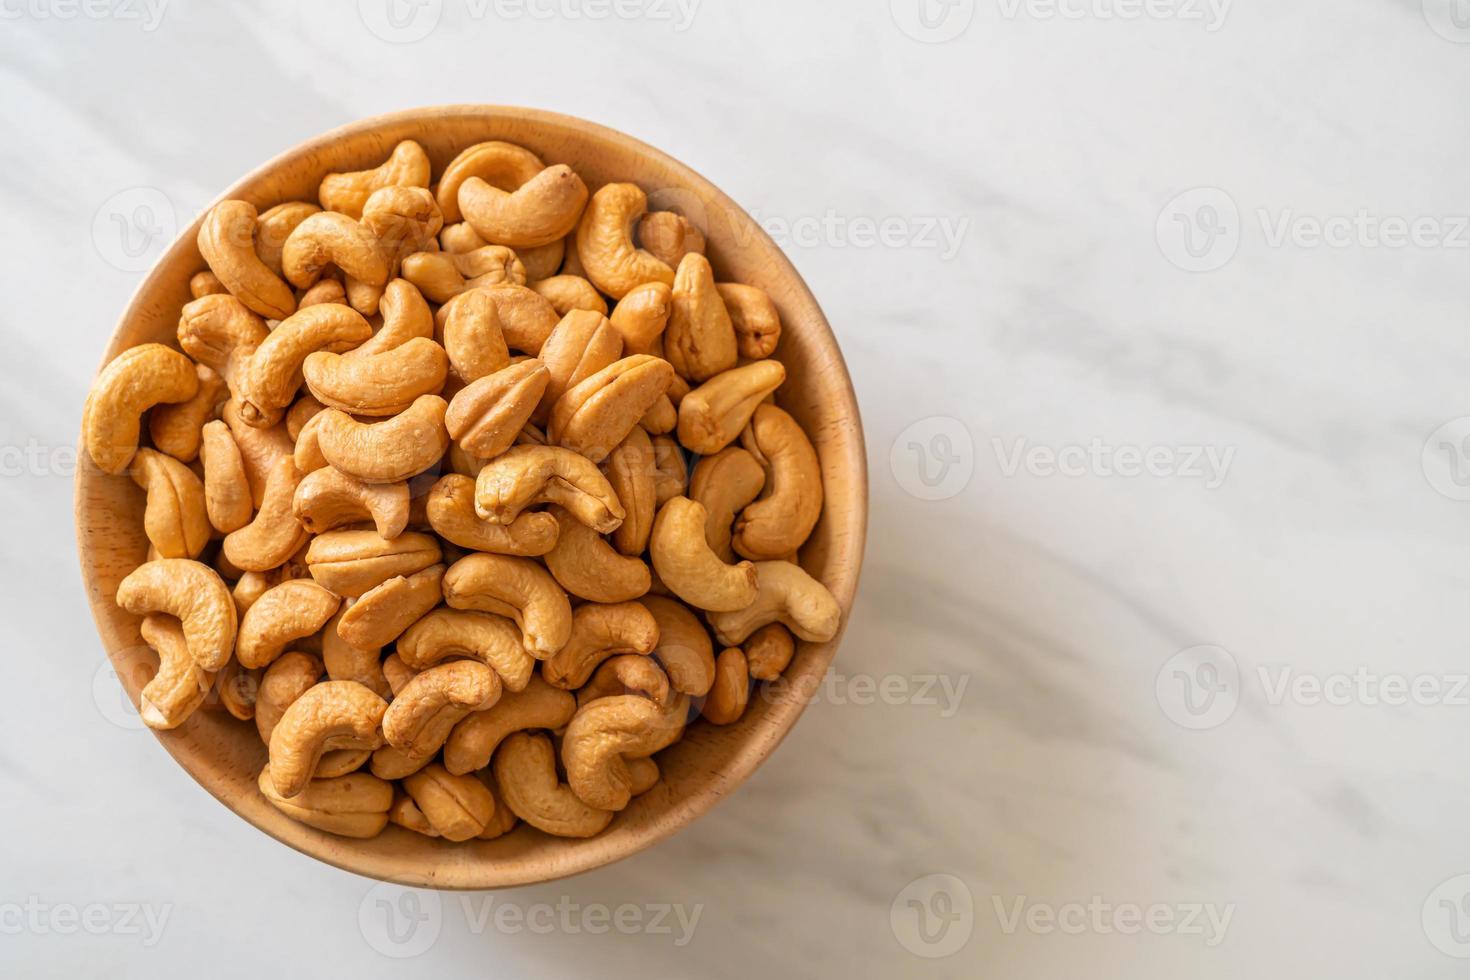 Cashew nuts in wooden bowl photo